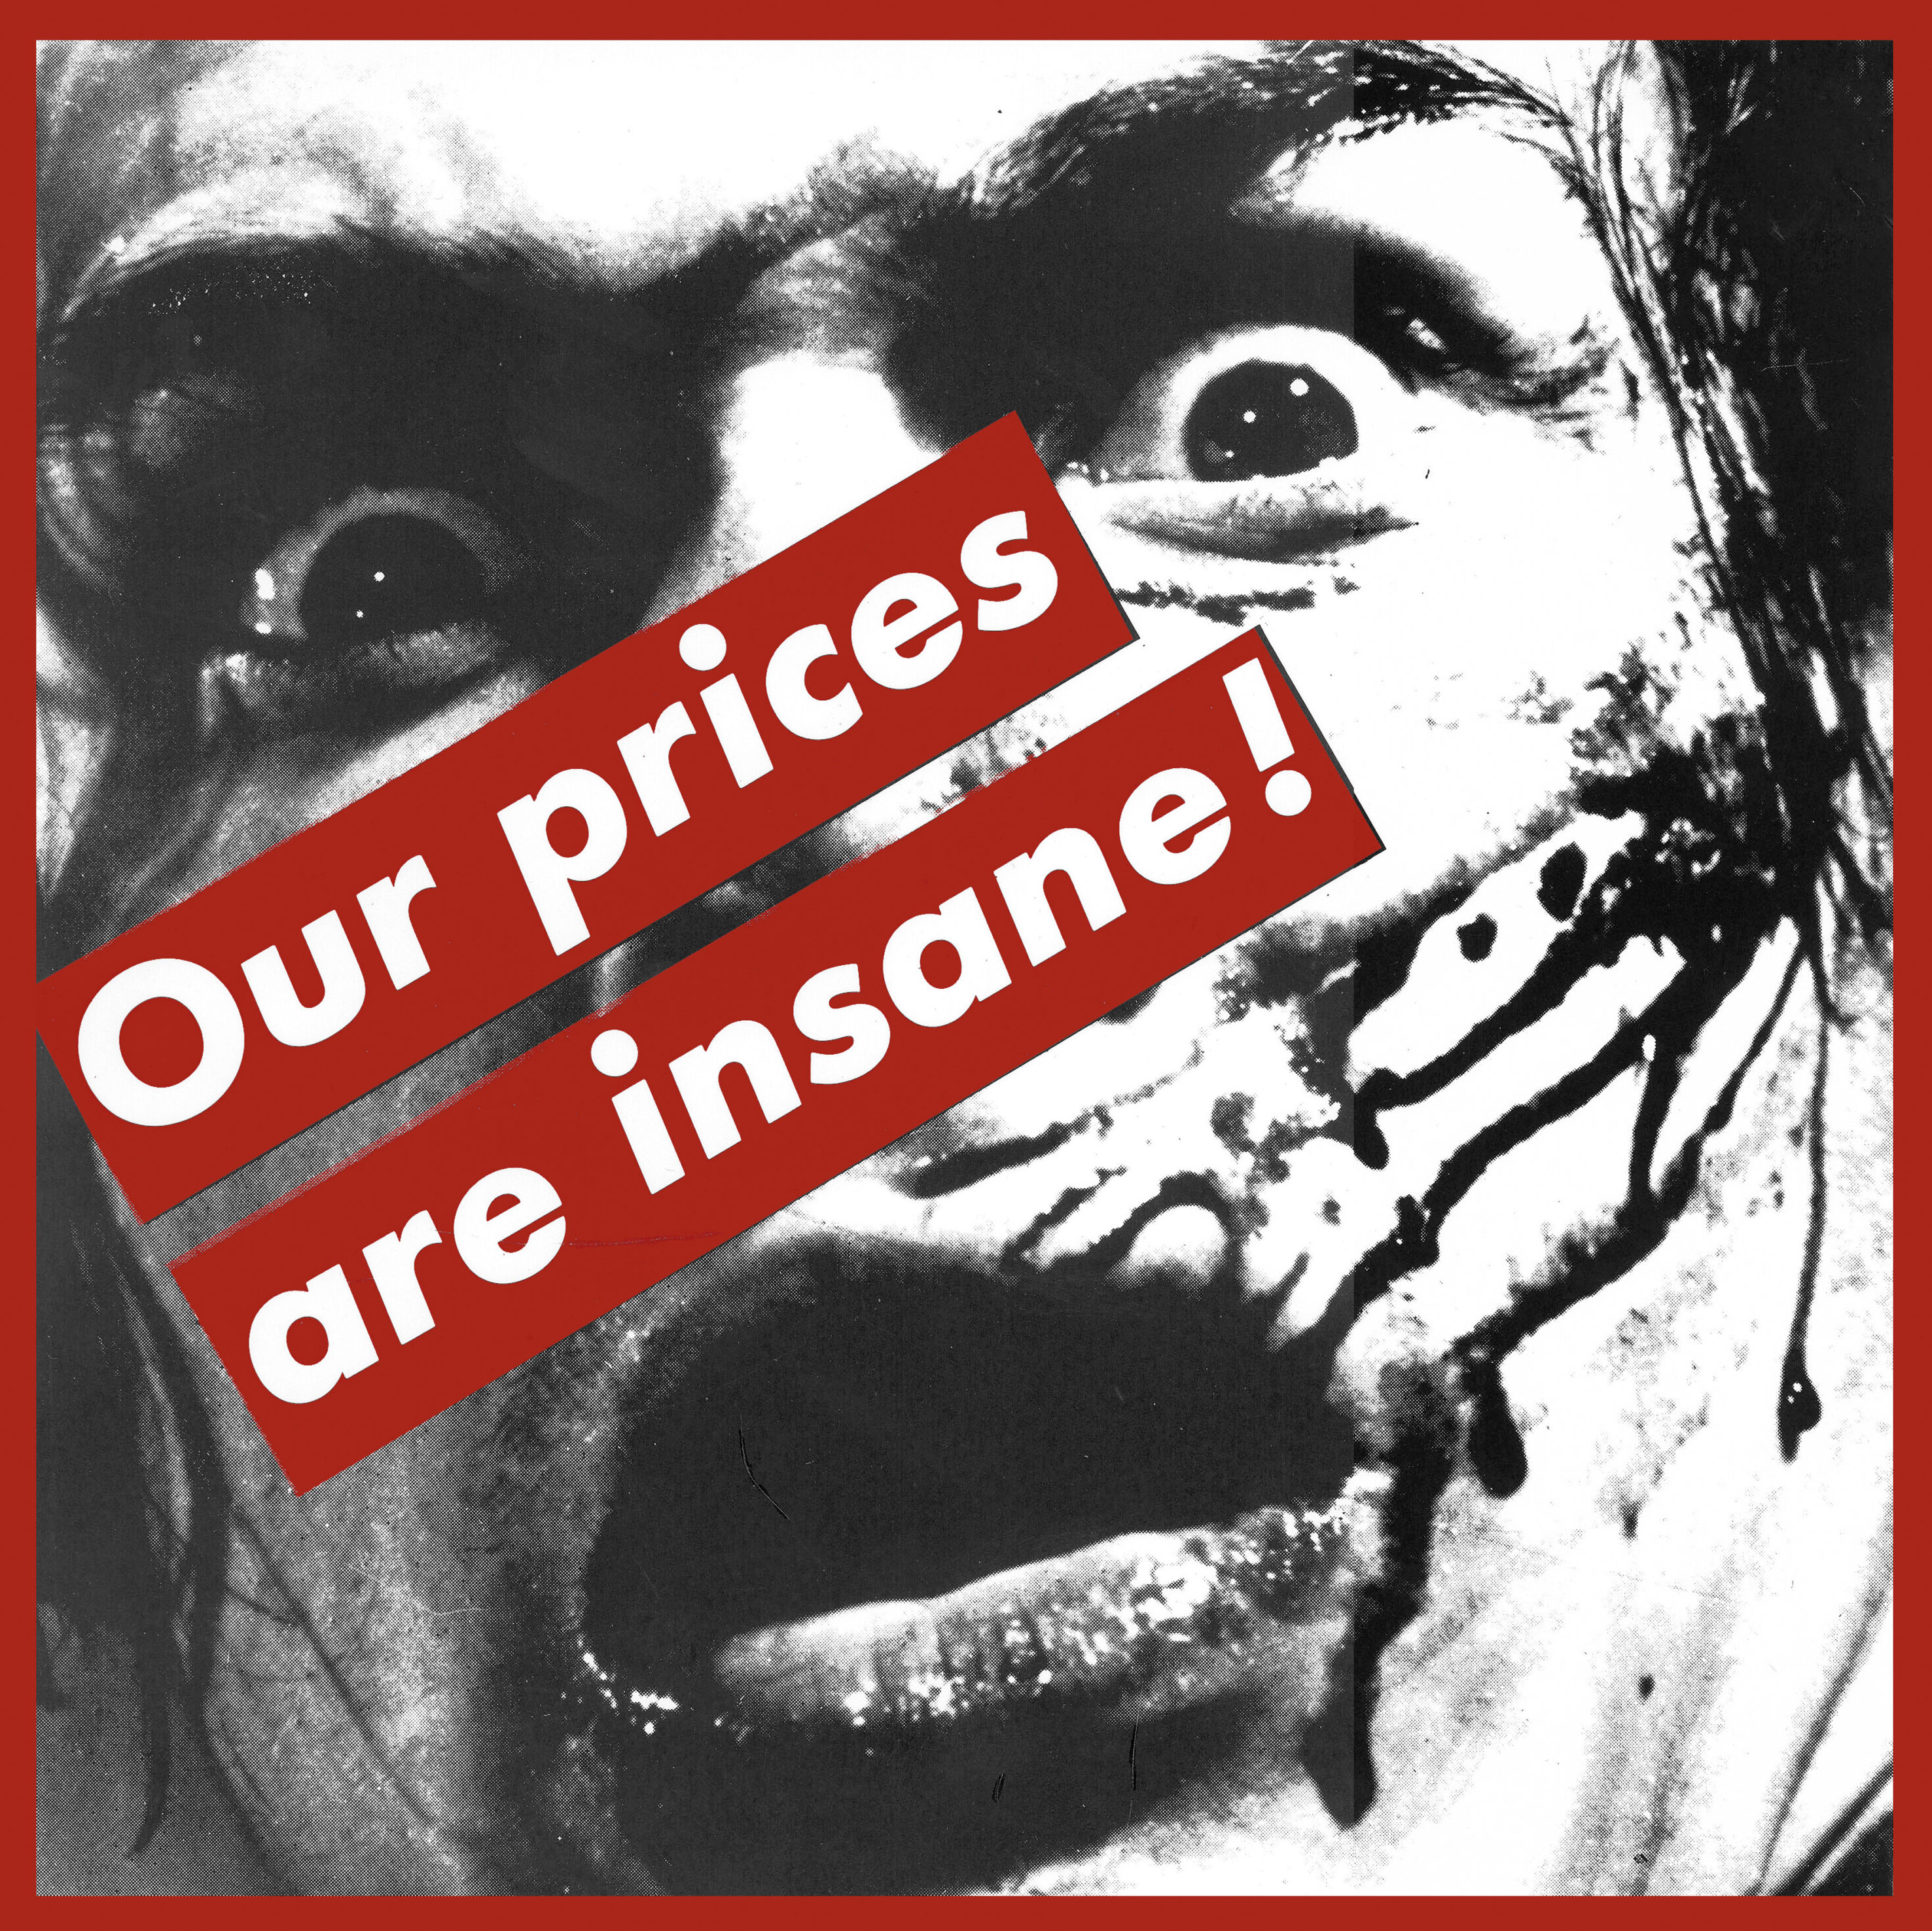 Untitled (Our prices are insane!)